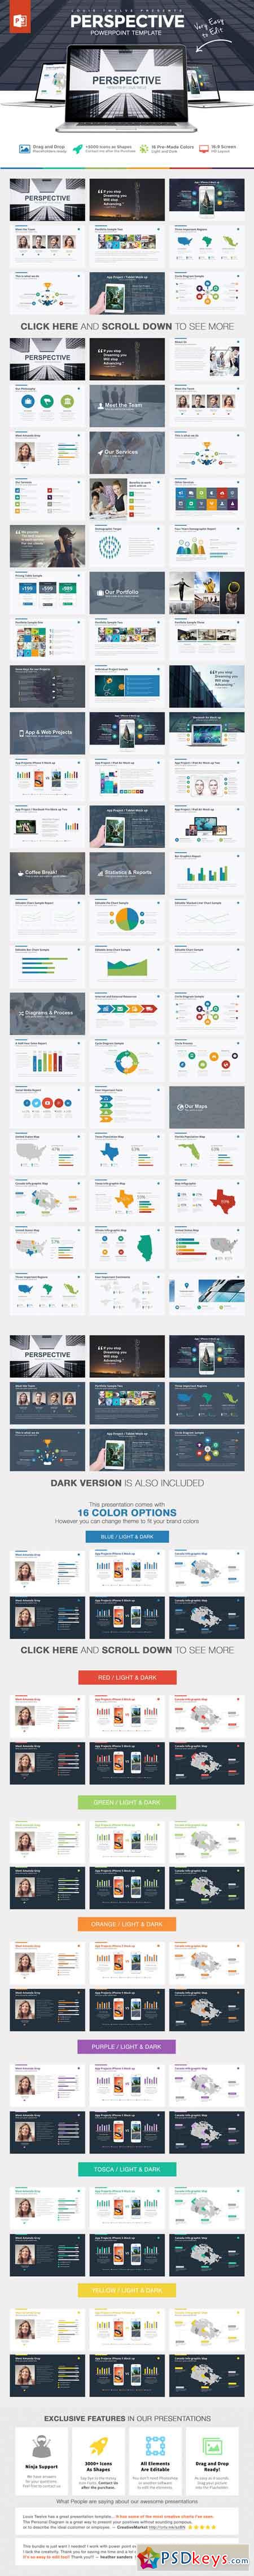 Perspective Powerpoint Template 235933